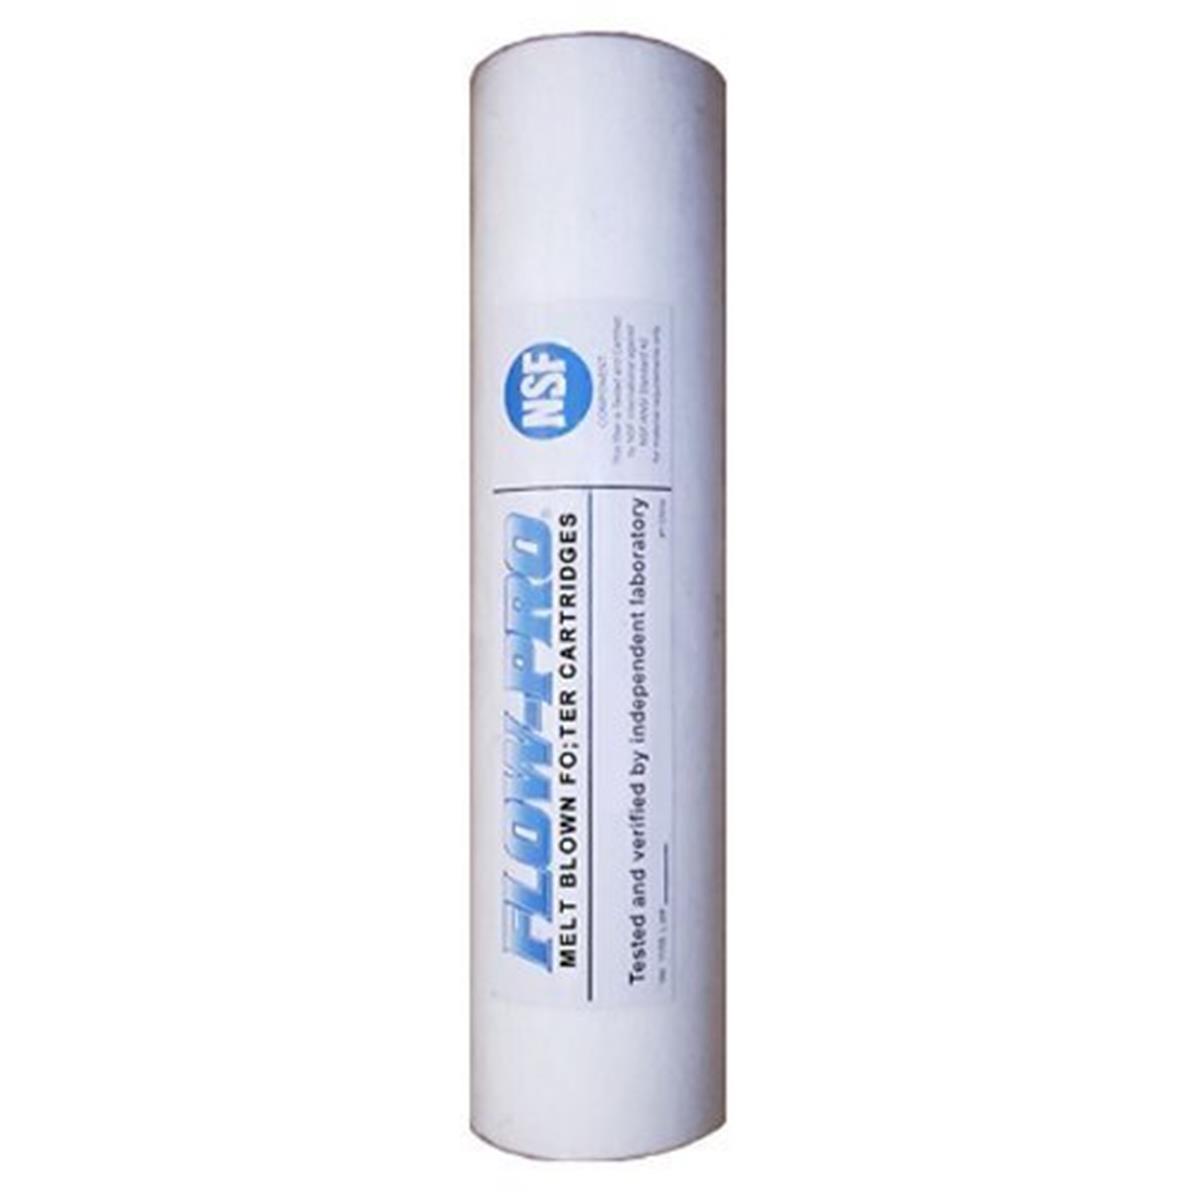 WATTS-FPMB5-978 Flo-Pro Replacement Filter Cartridge -  Commercial Water Distributing